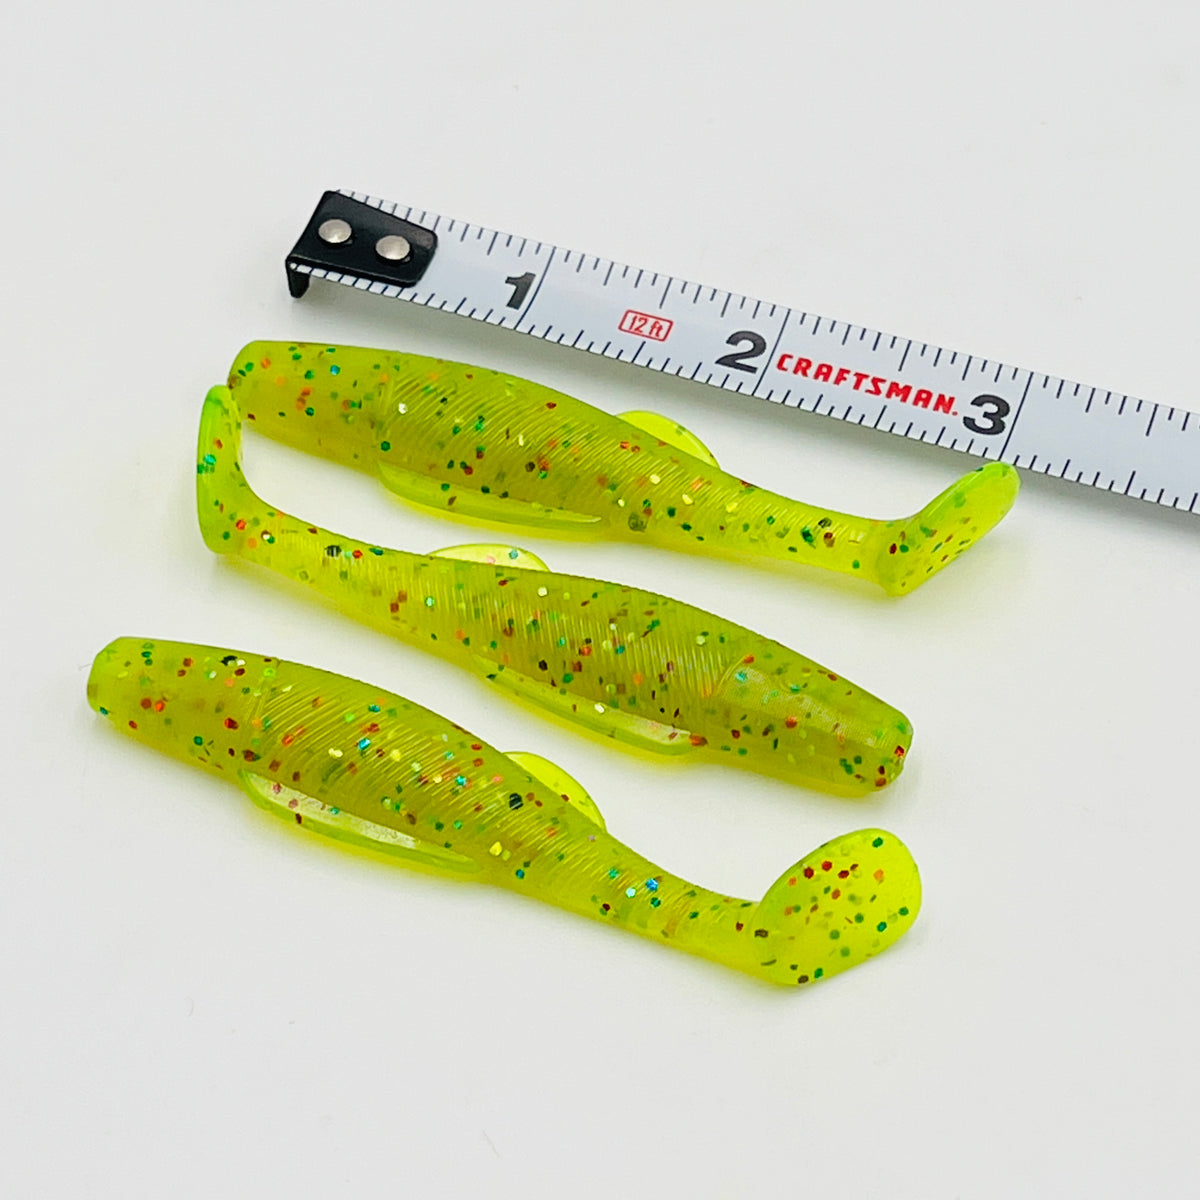 3 Inch Inshore Paddle Tail Swimbait Hand Injection Mold – Epic Bait